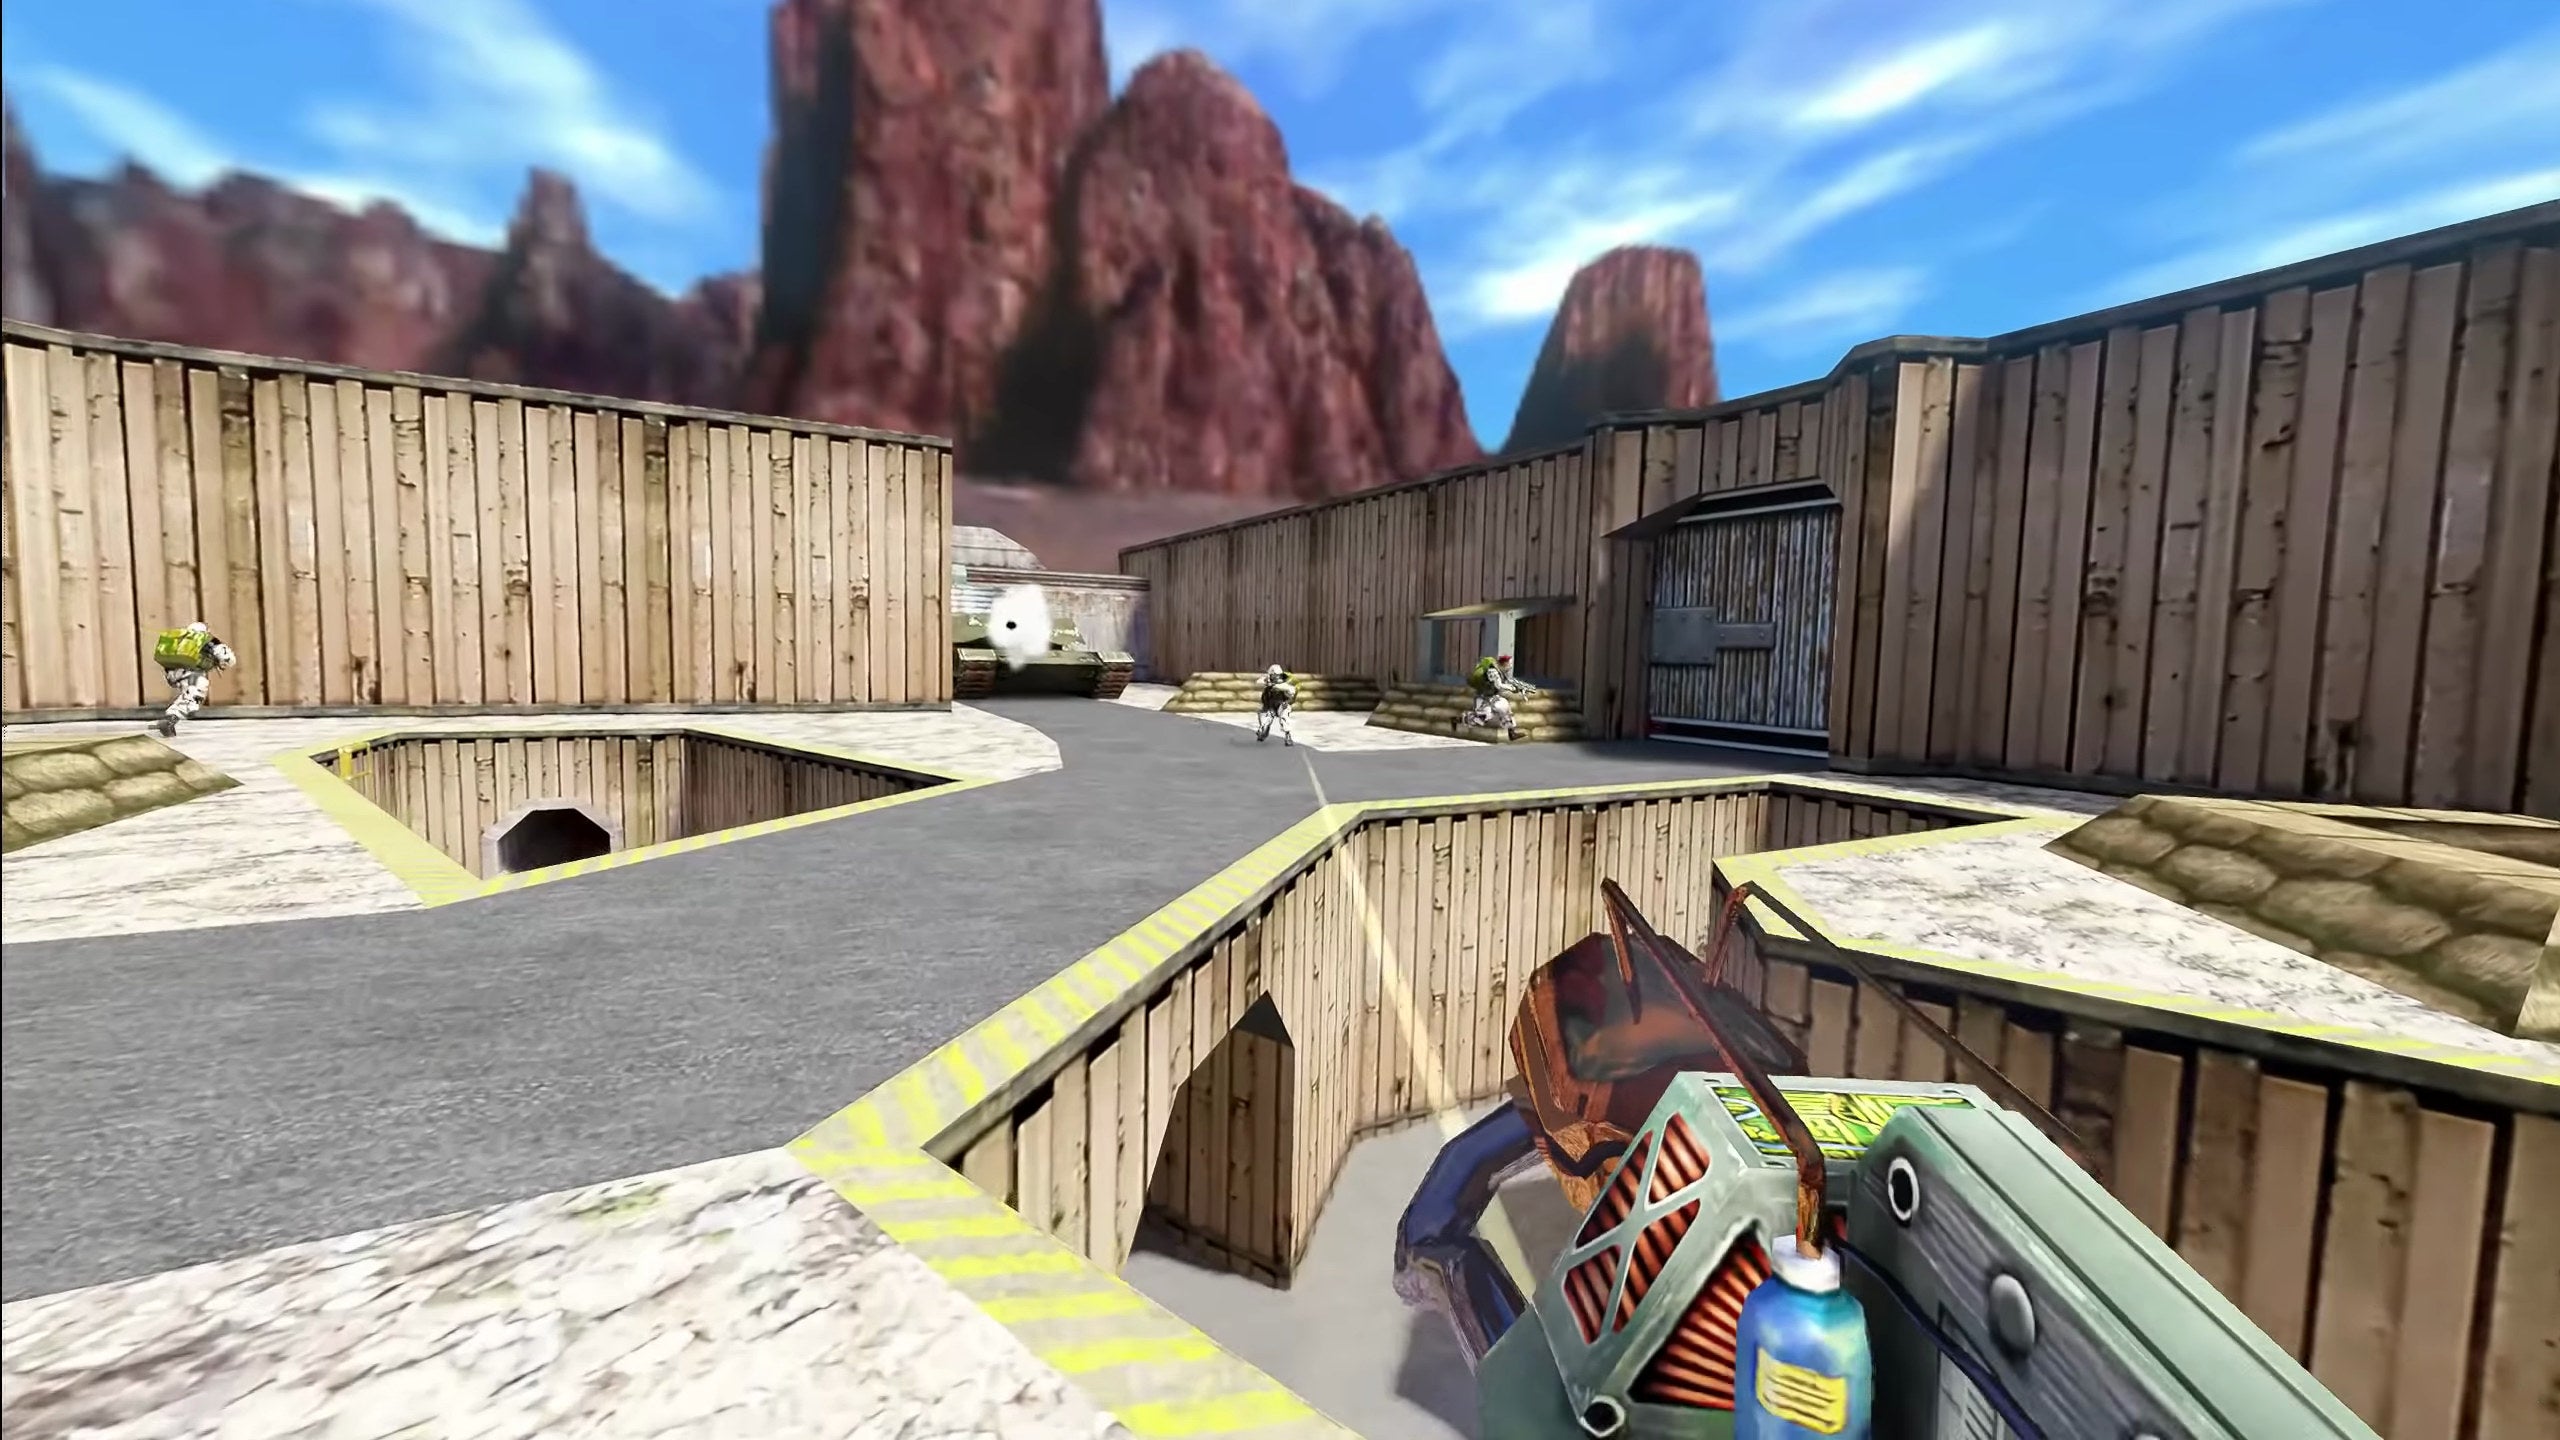 Half-Life looks good with in this mod Rock Paper Shotgun